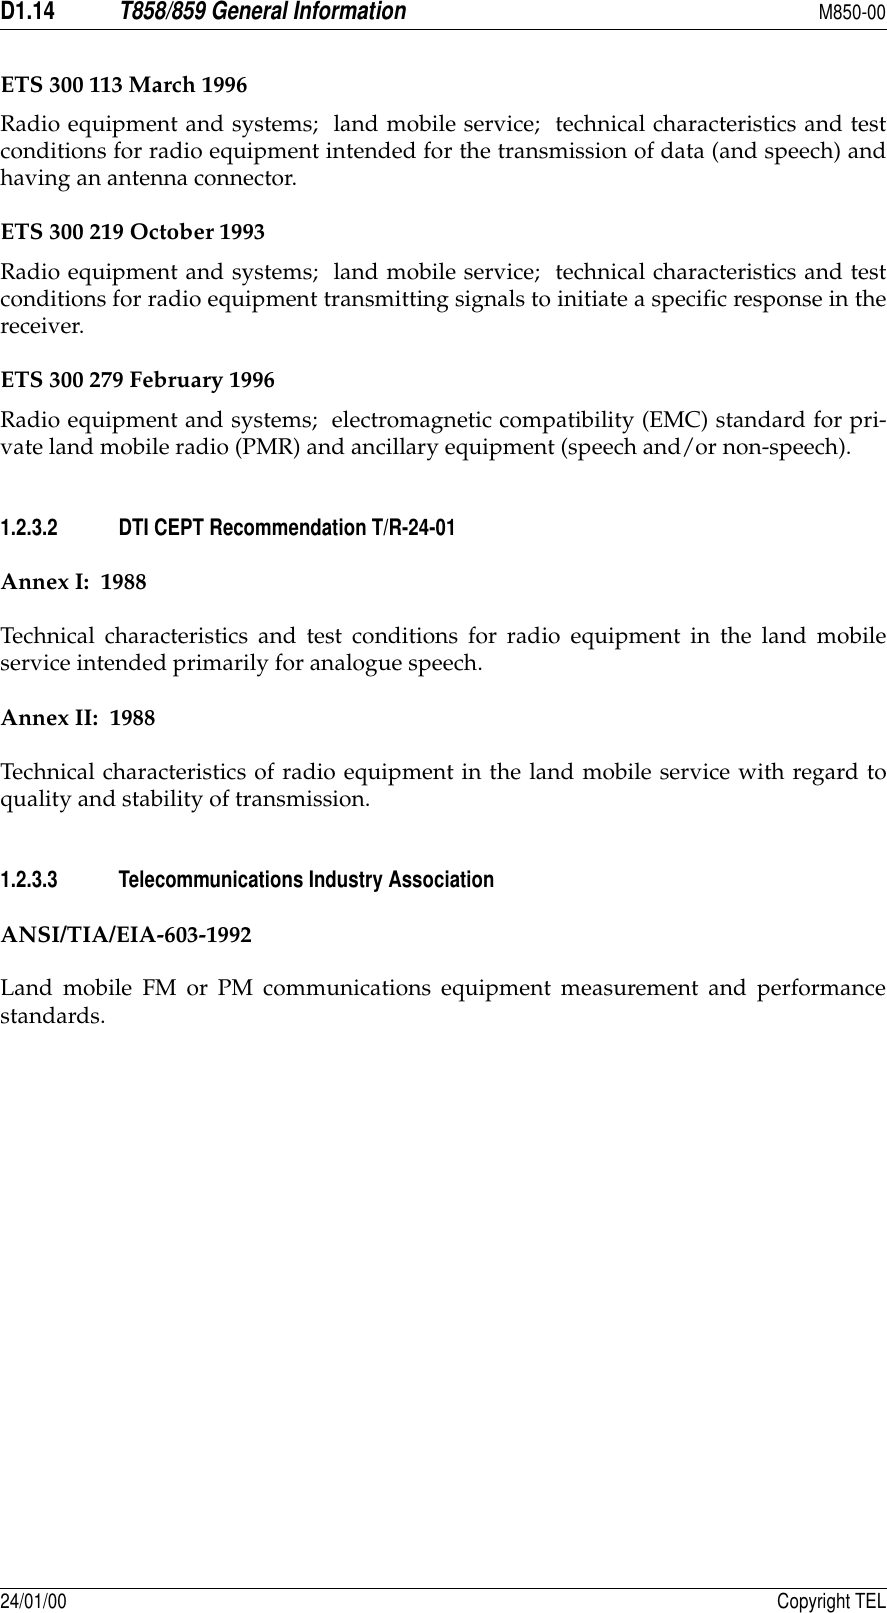 D1.14T858/859 General InformationM850-0024/01/00 Copyright TELETS 300 113 March 1996Radio equipment and systems;  land mobile service;  technical characteristics and testconditions for radio equipment intended for the transmission of data (and speech) andhaving an antenna connector.ETS 300 219 October 1993Radio equipment and systems;  land mobile service;  technical characteristics and testconditions for radio equipment transmitting signals to initiate a specific response in thereceiver.ETS 300 279 February 1996Radio equipment and systems;  electromagnetic compatibility (EMC) standard for pri-vate land mobile radio (PMR) and ancillary equipment (speech and/or non-speech).1.2.3.2 DTI CEPT Recommendation T/R-24-01Annex I:  1988Technical characteristics and test conditions for radio equipment in the land mobileservice intended primarily for analogue speech.Annex II:  1988Technical characteristics of radio equipment in the land mobile service with regard toquality and stability of transmission.1.2.3.3 Telecommunications Industry AssociationANSI/TIA/EIA-603-1992Land mobile FM or PM communications equipment measurement and performancestandards.